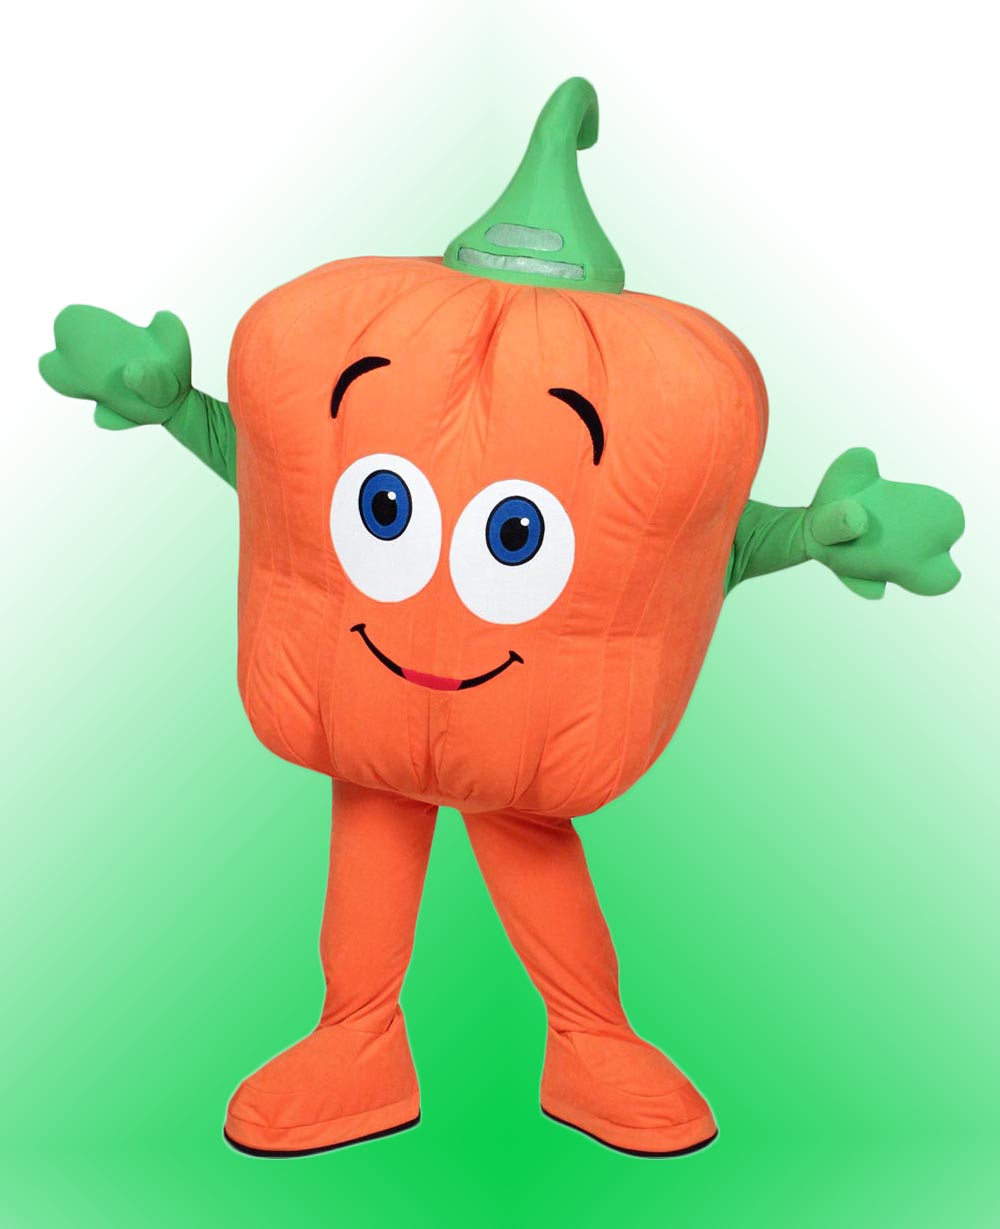 Spookley Mascot is an Orange Colored Pumpkin Shaped Custom Inflatable Mascot made by Costume Specialists